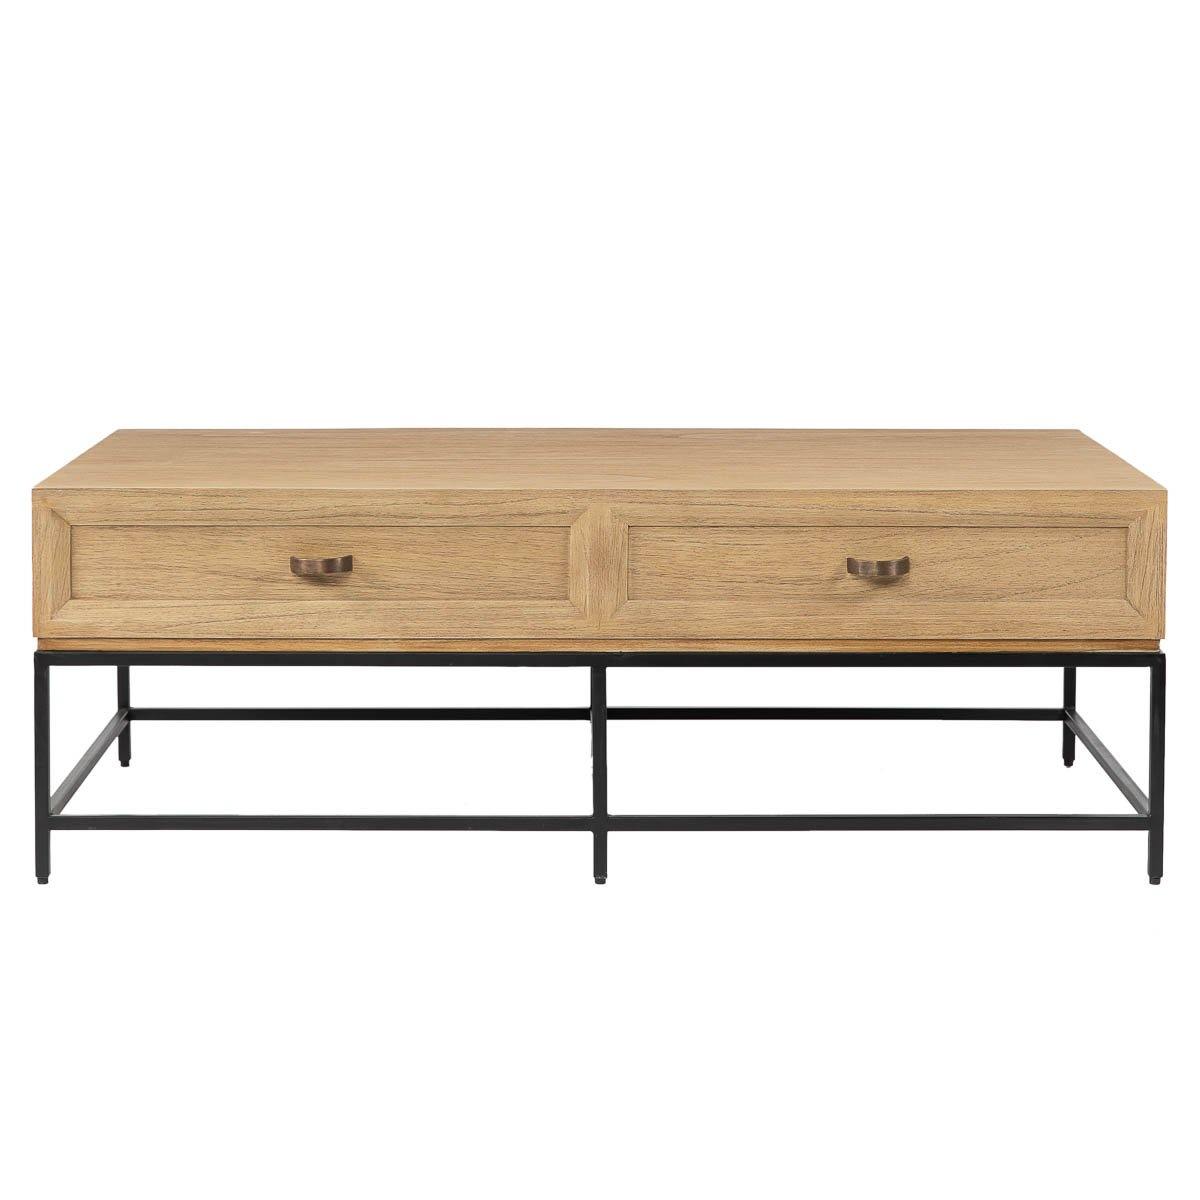 Lounge Styles iluka road Quay Coffee Table 2 Drawers -Natural, Black Base 60cm